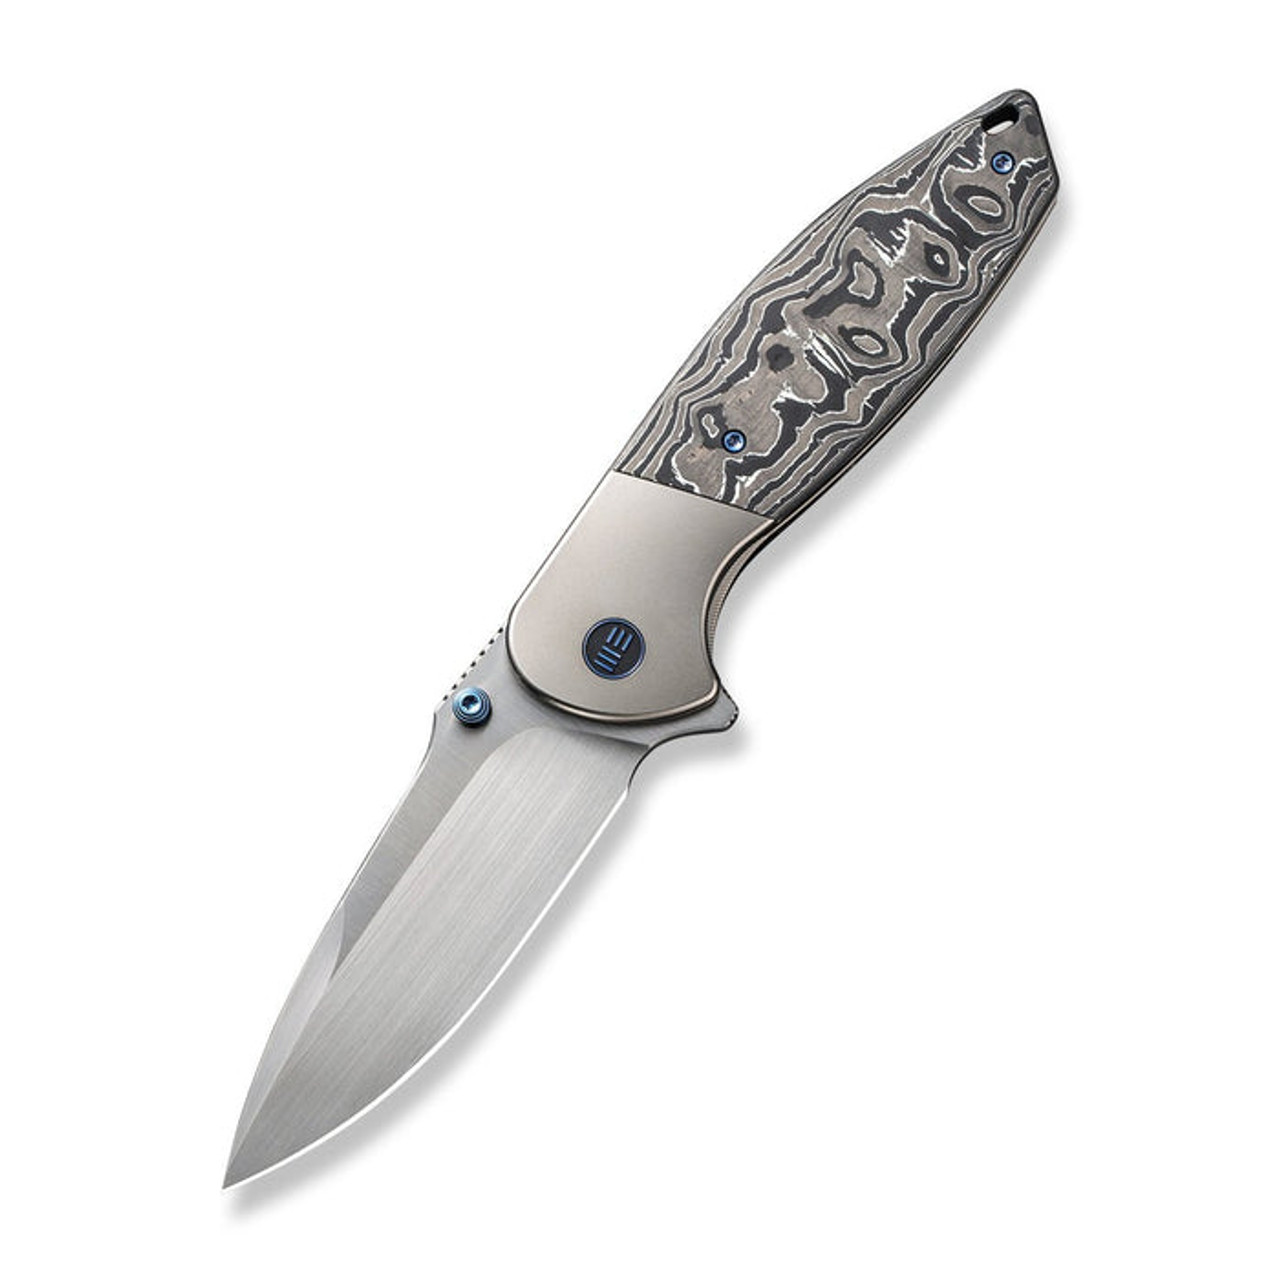 WE Knife Nitro OG (WE230353) 3.75" CPM-20CV Hand Rubbed Satin Drop Point Plain Blade, Bead Blasted Titanium with Black White and Gray Aluminum Foil Carbon Fiber Inlay